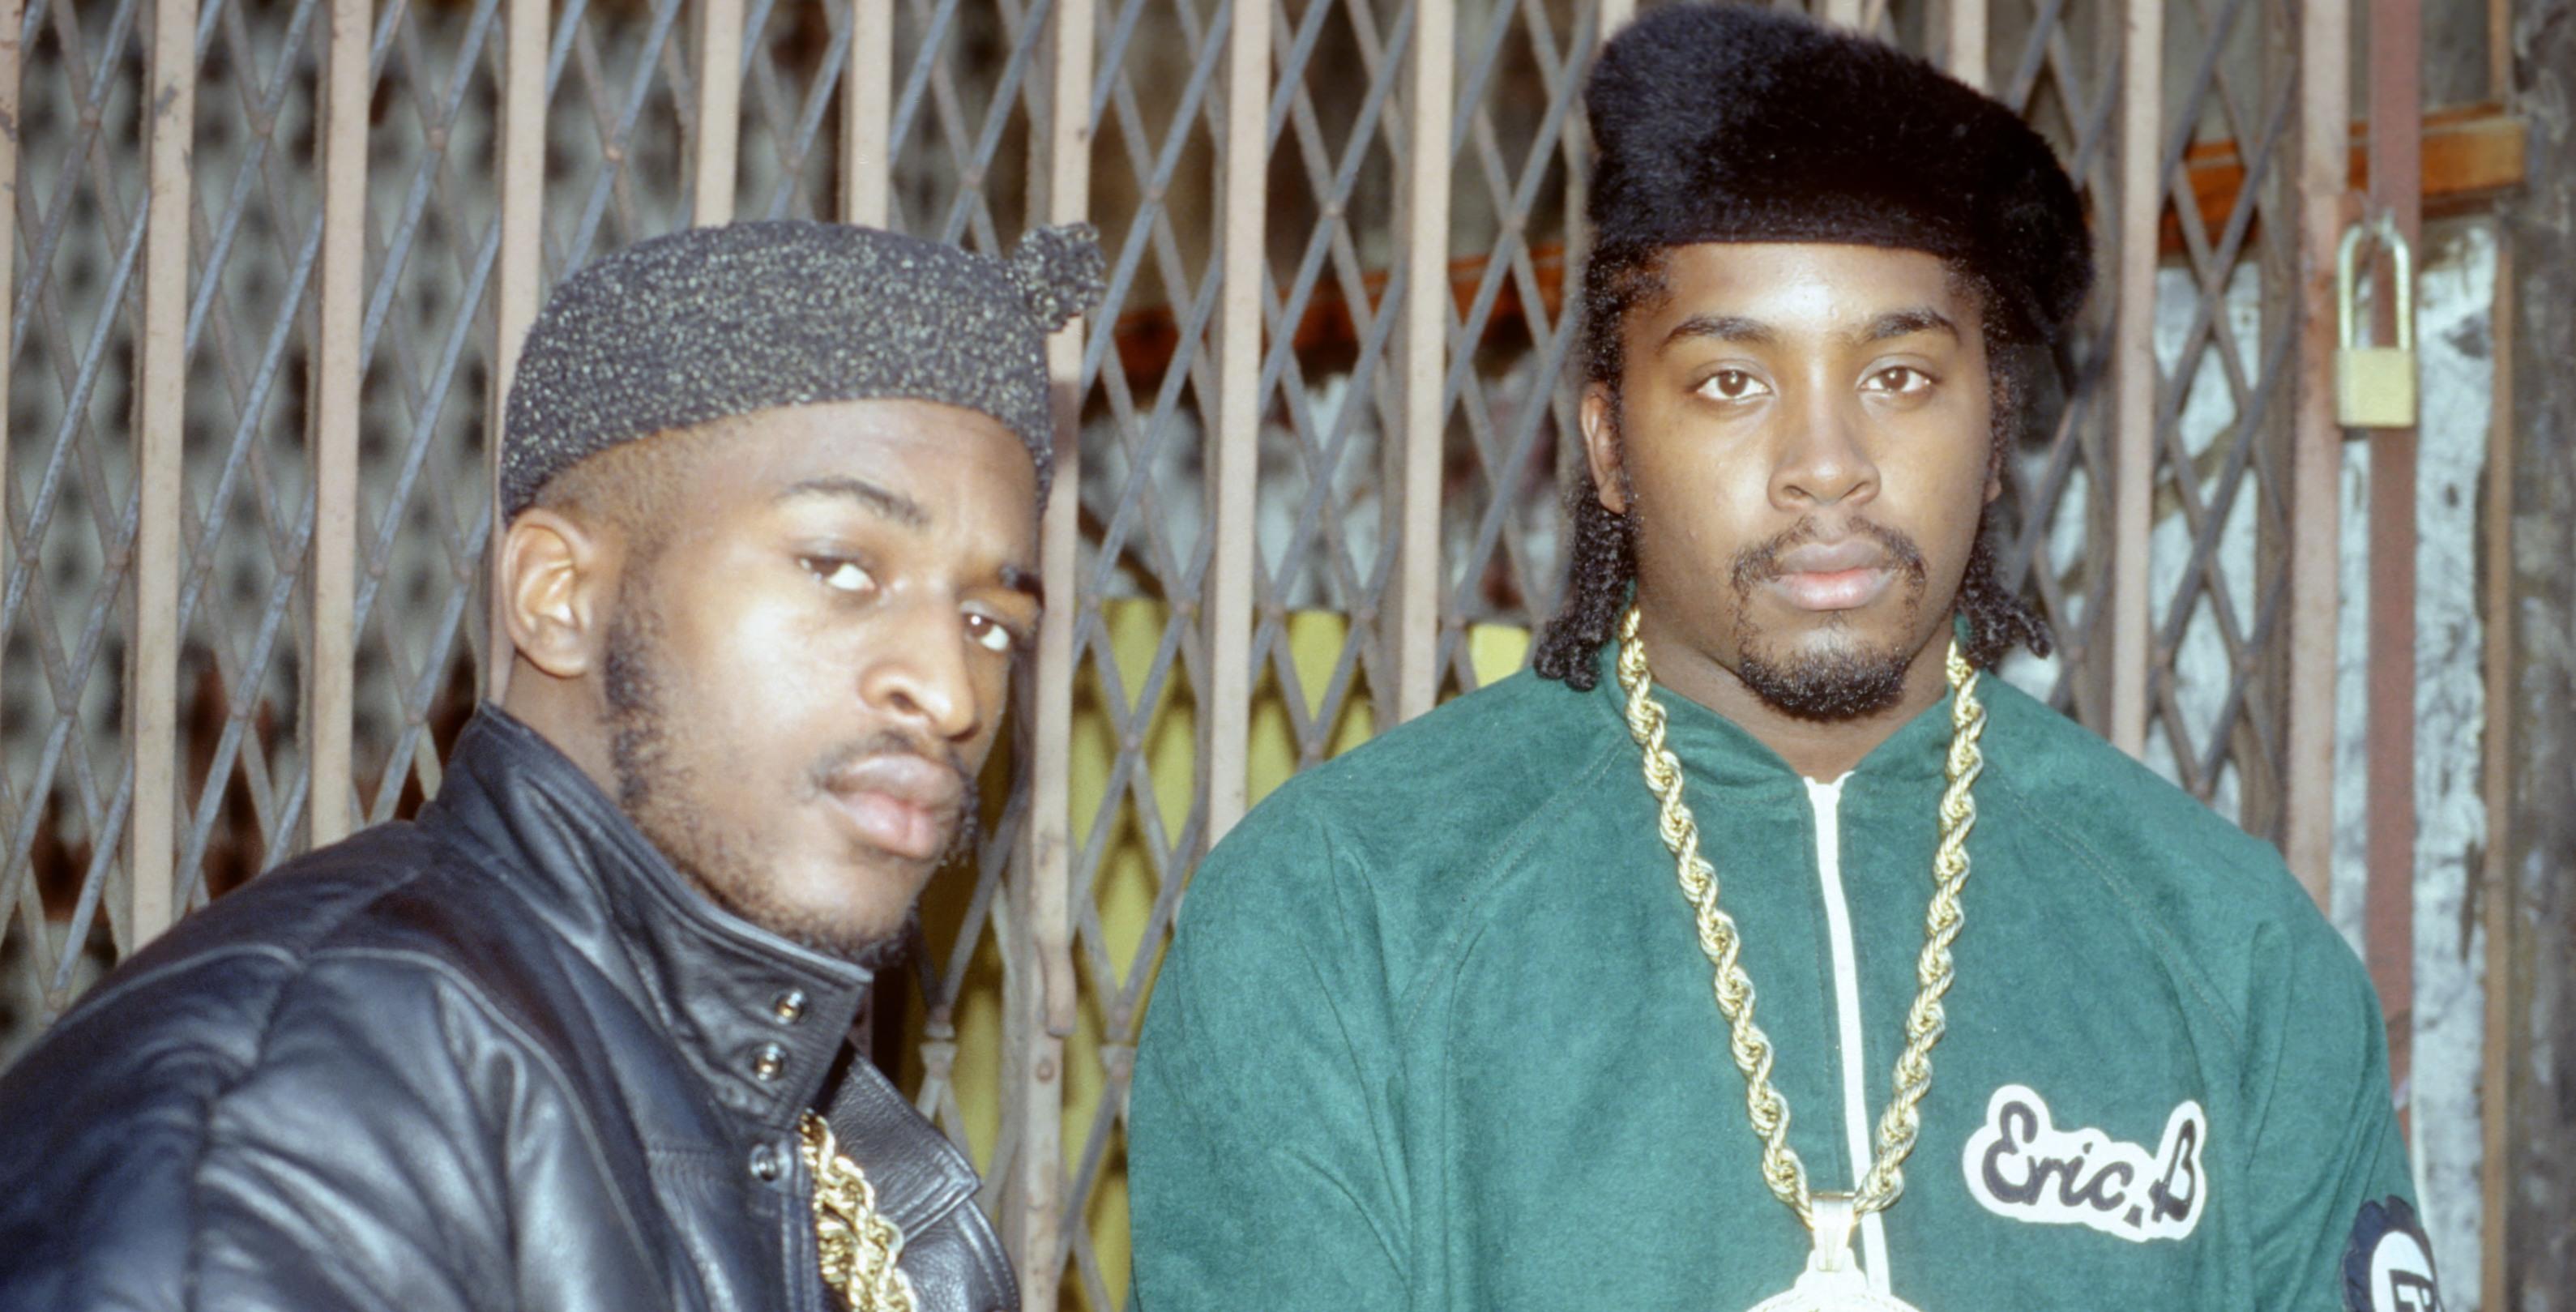 Rappers Eric B & Rakim pose for a portrait session in 1987 in New York, New York